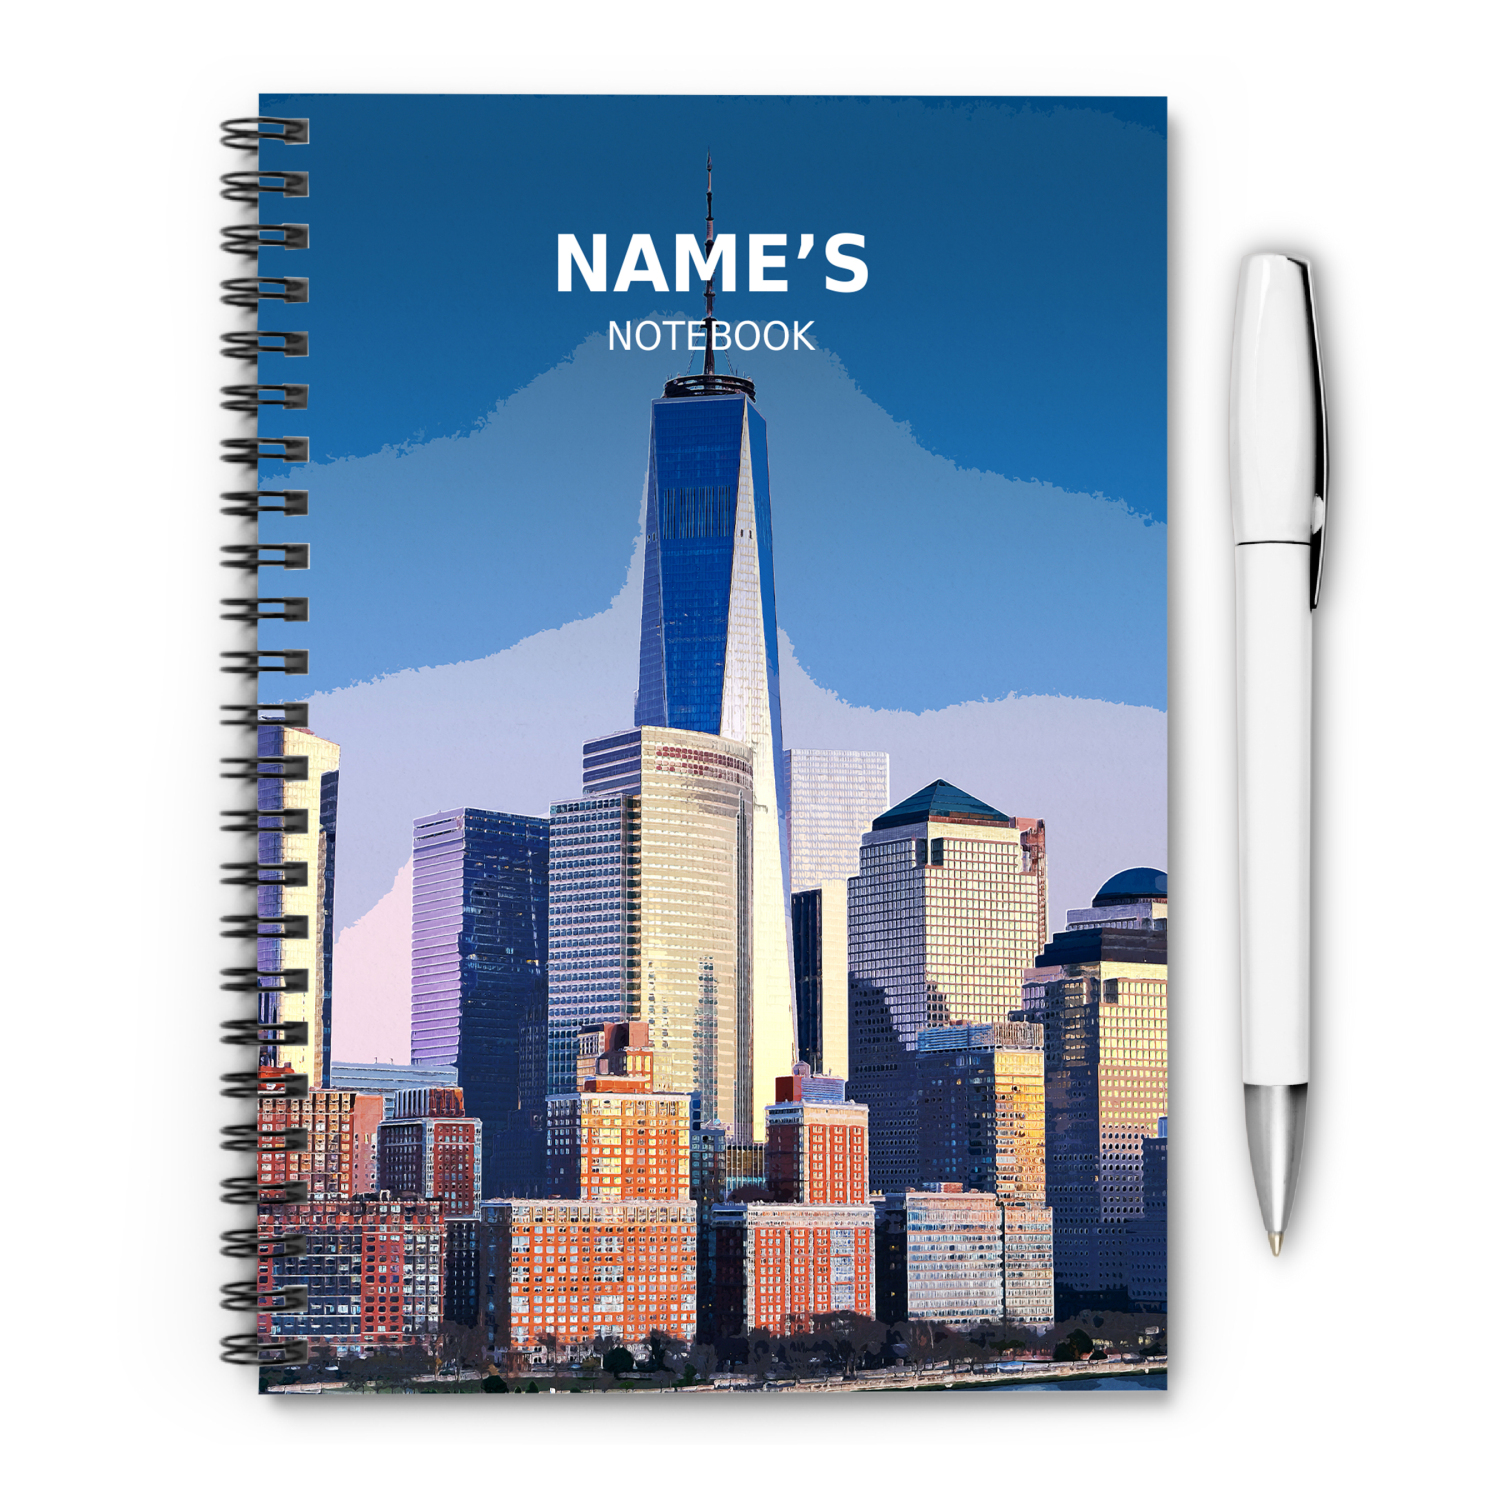 One world trade centre - New York - A5 Notebook - Single Note Book